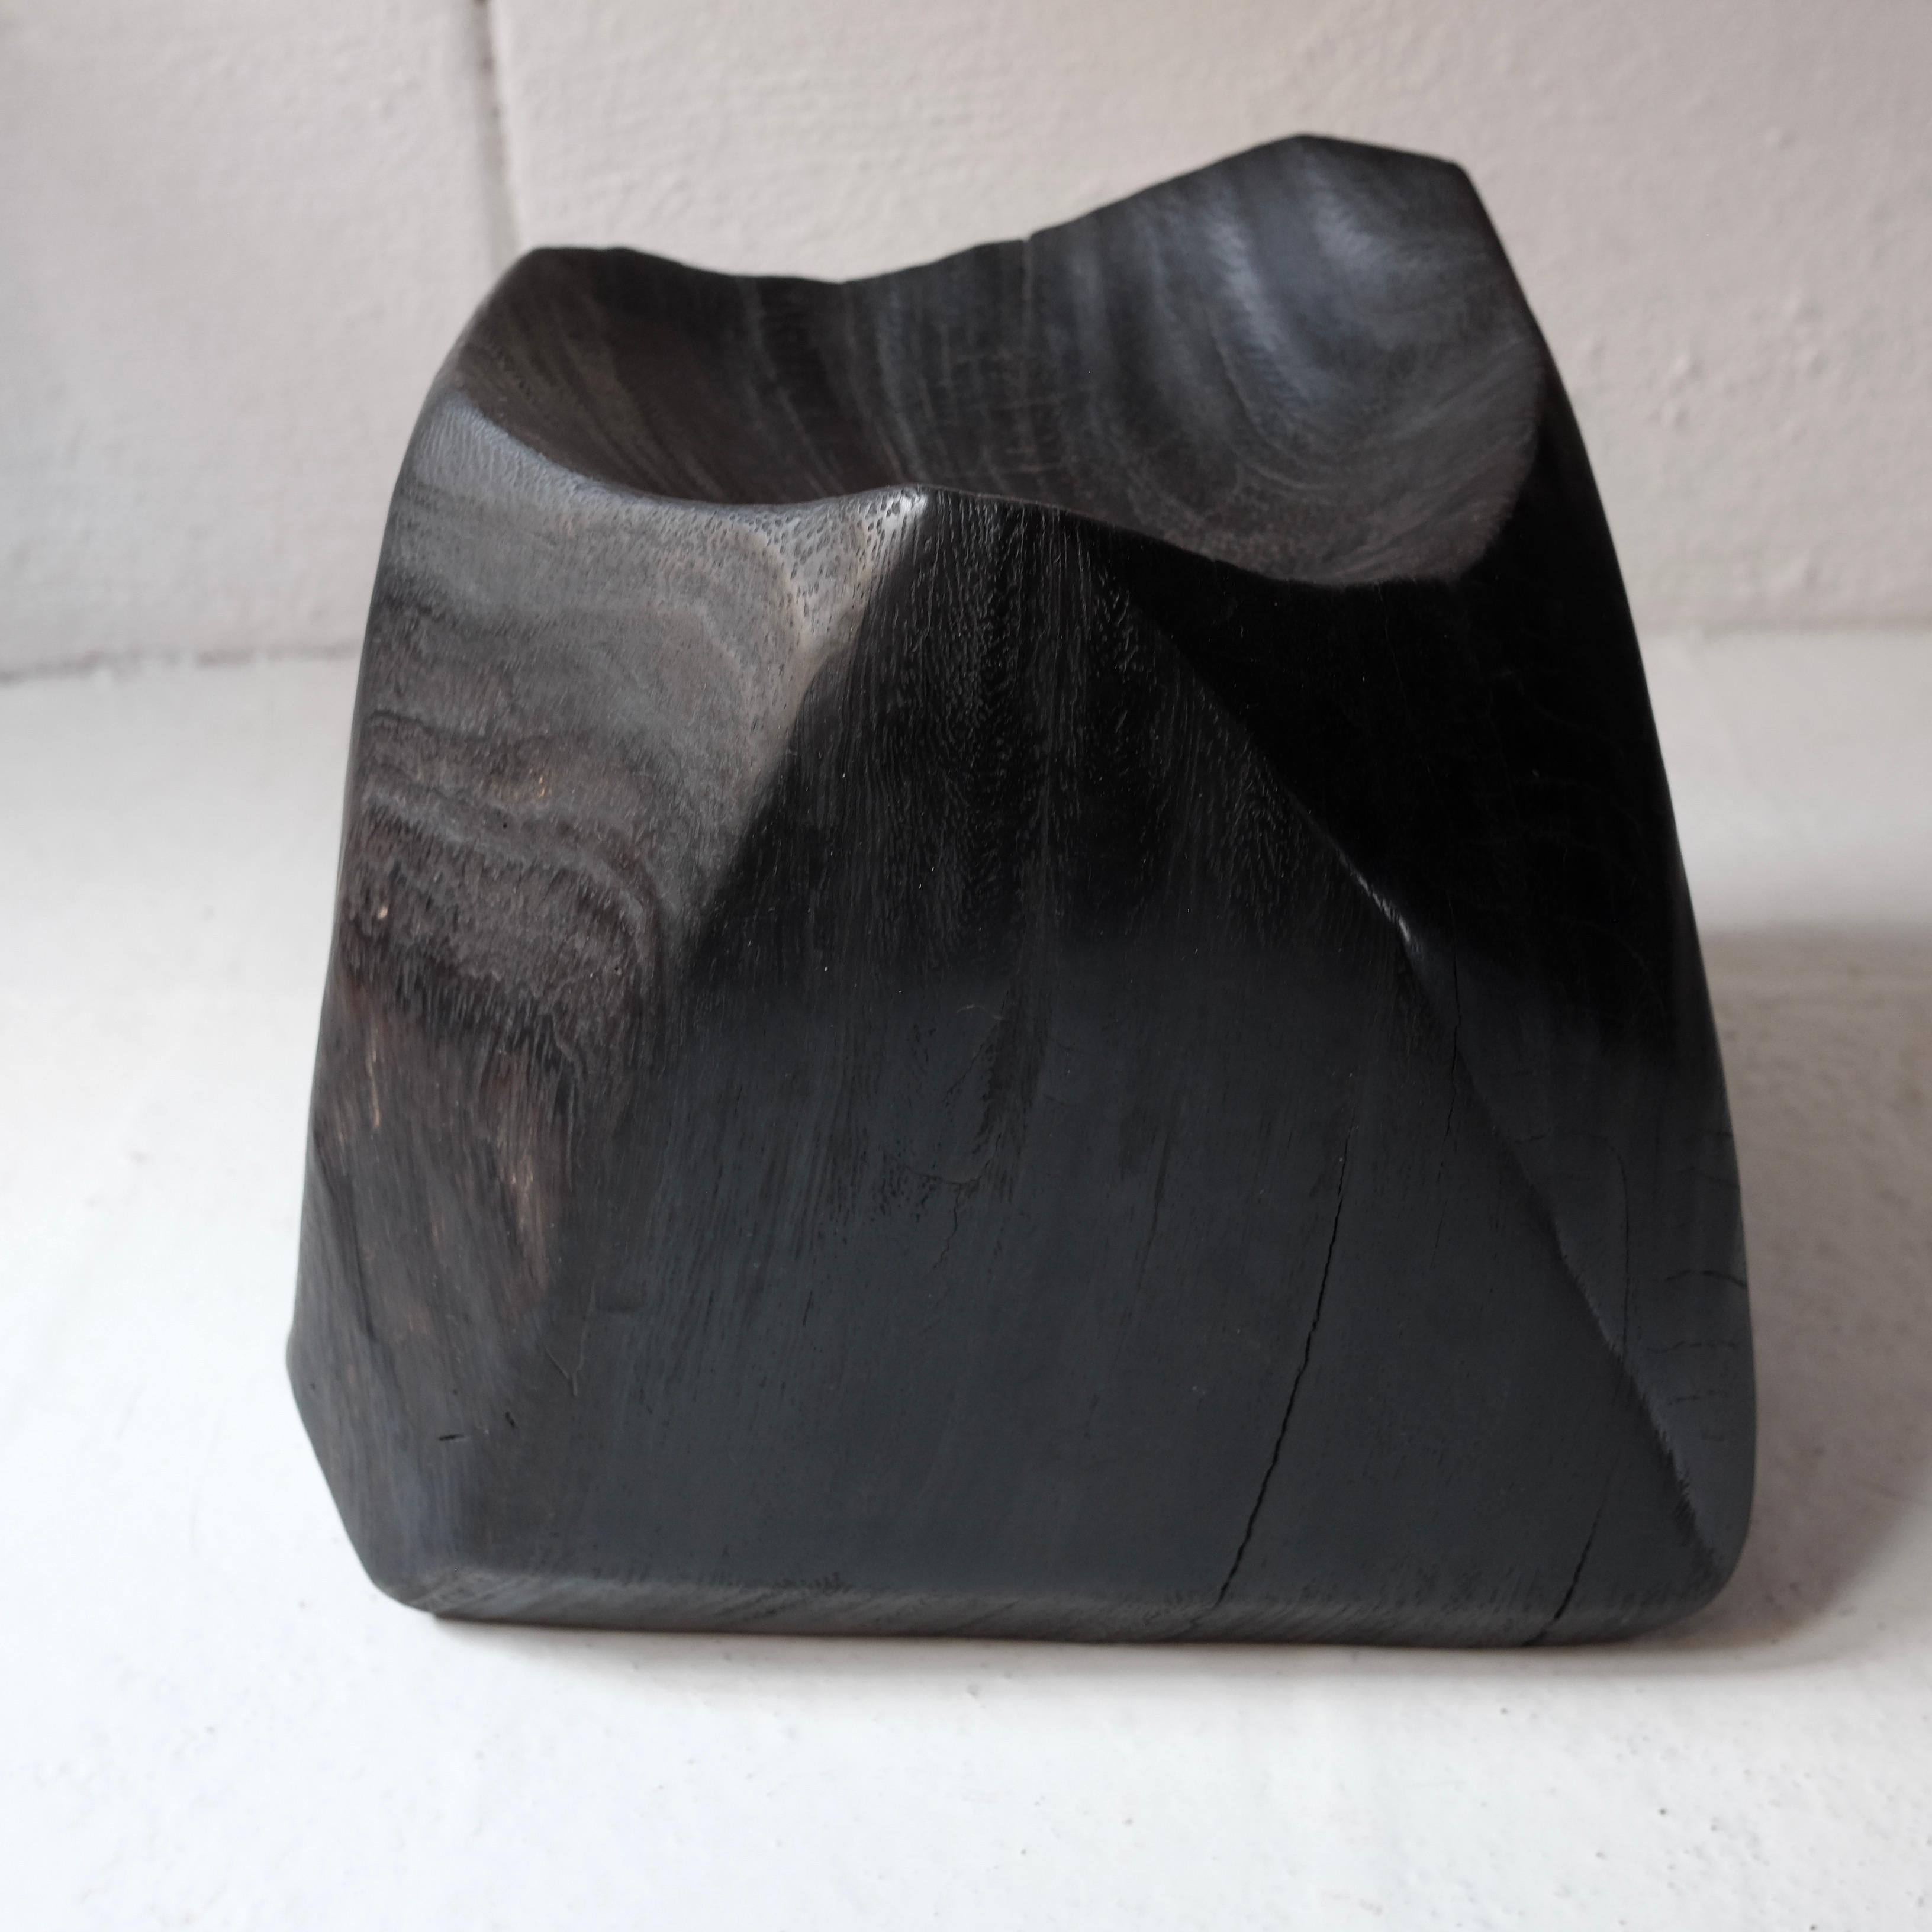 Fired Contemporary Wood Sculpture